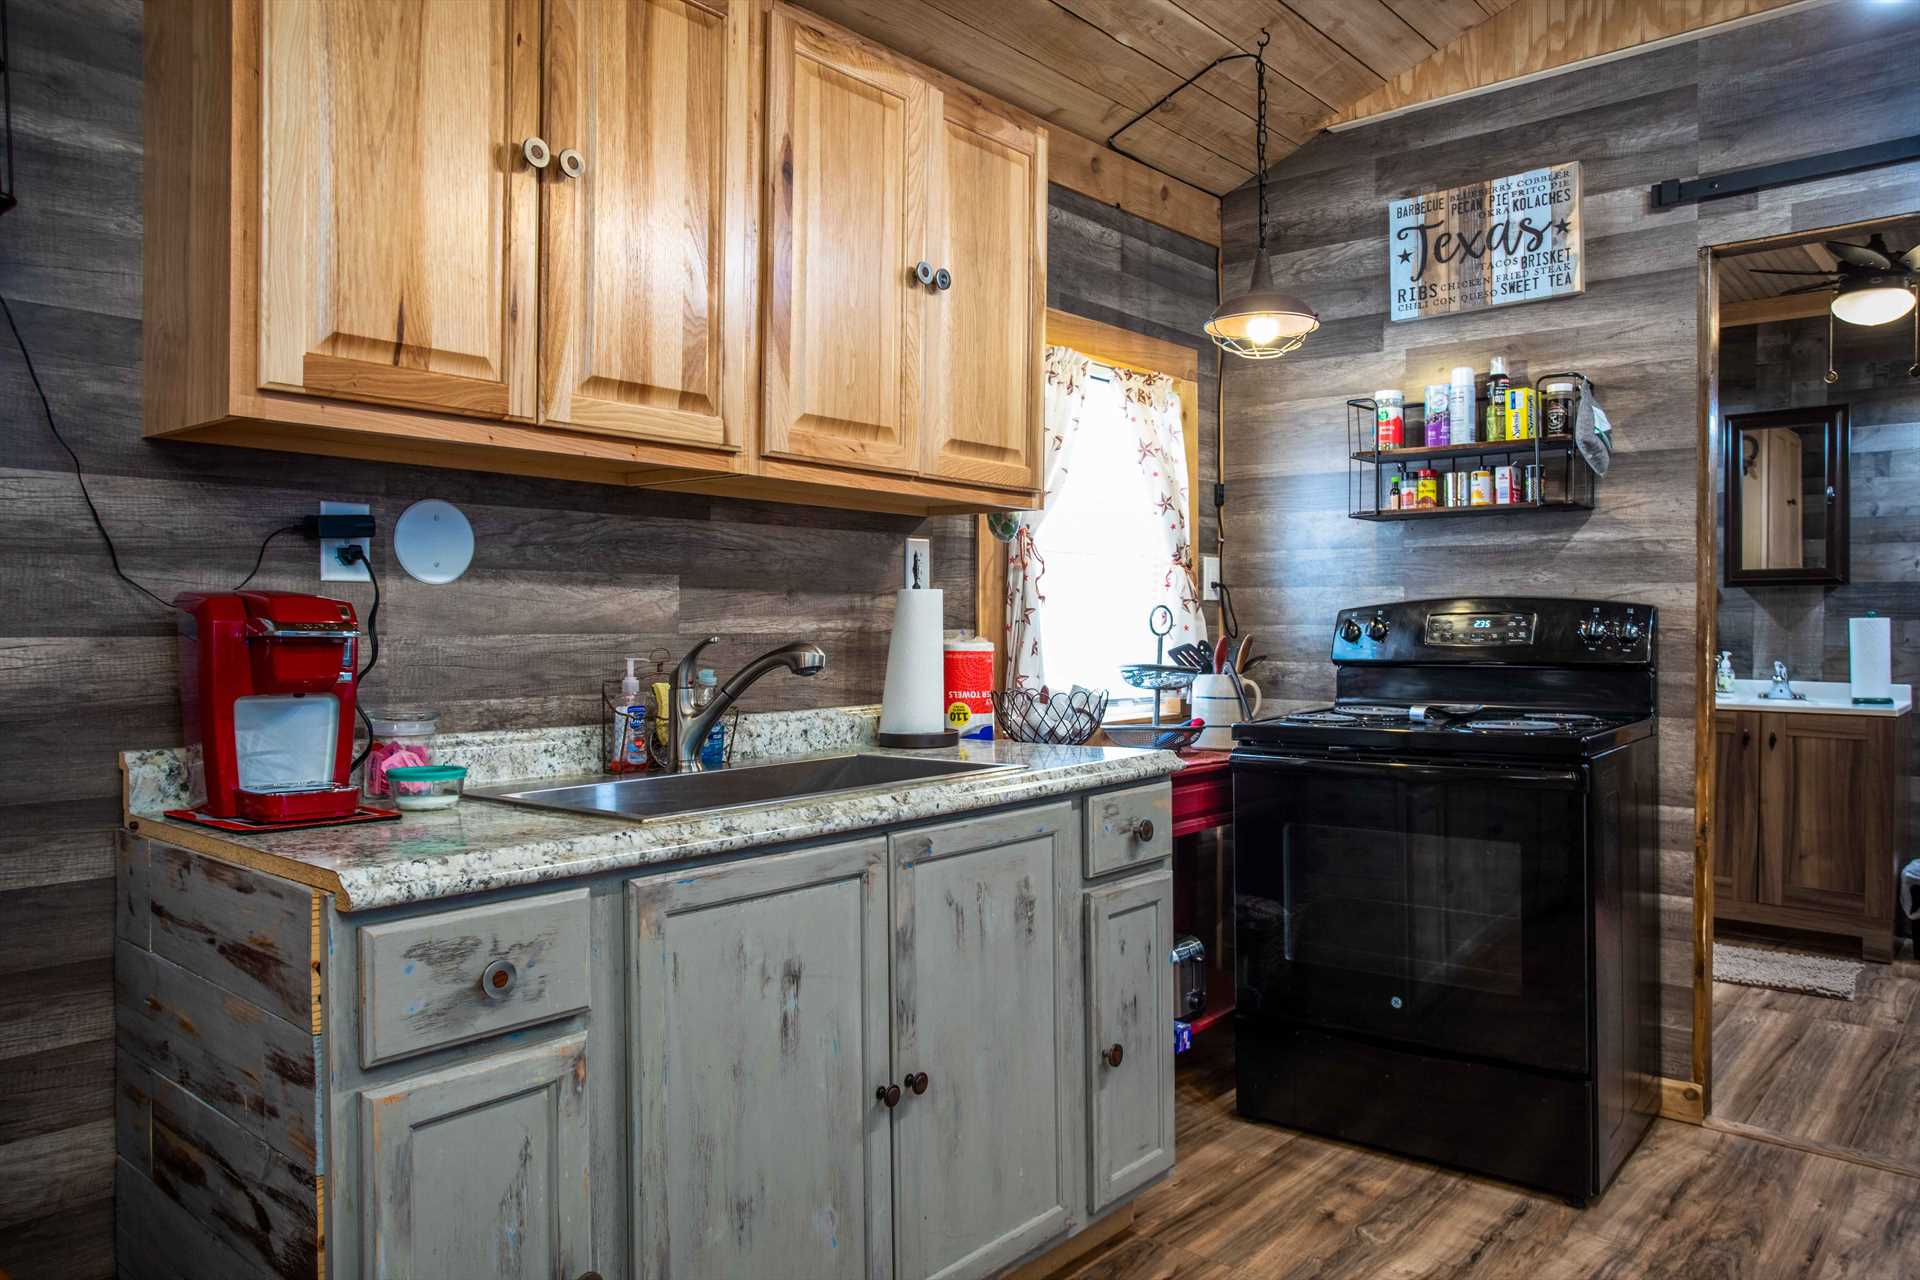                                                 A convenient stove and large sink fill out the useful space in the cabin's full kitchen!